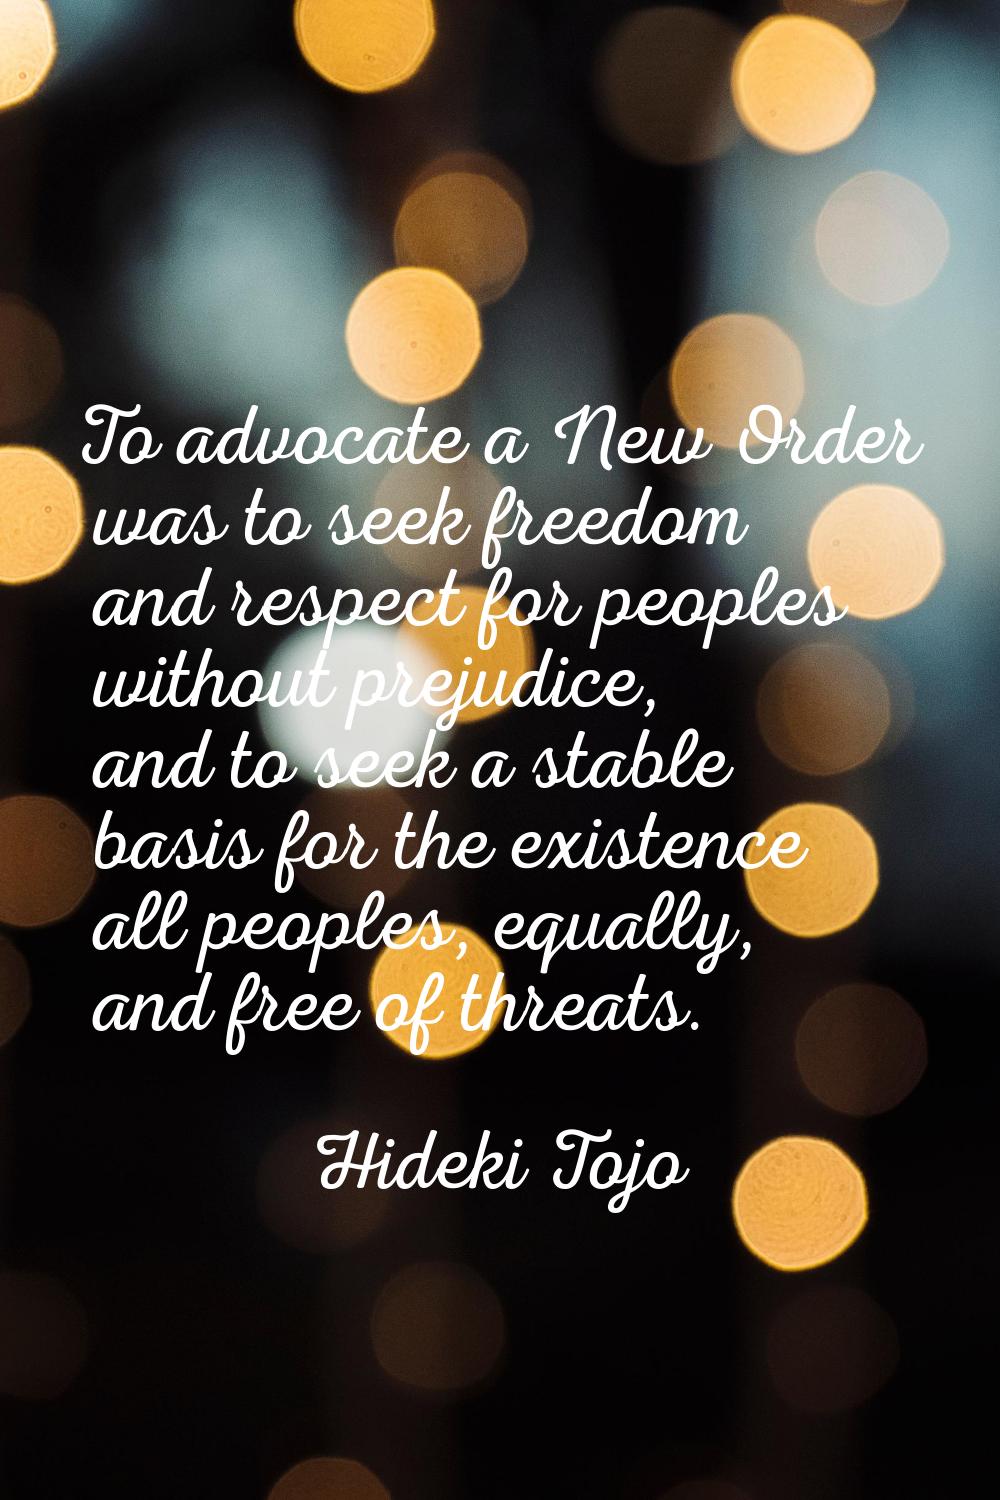 To advocate a New Order was to seek freedom and respect for peoples without prejudice, and to seek 